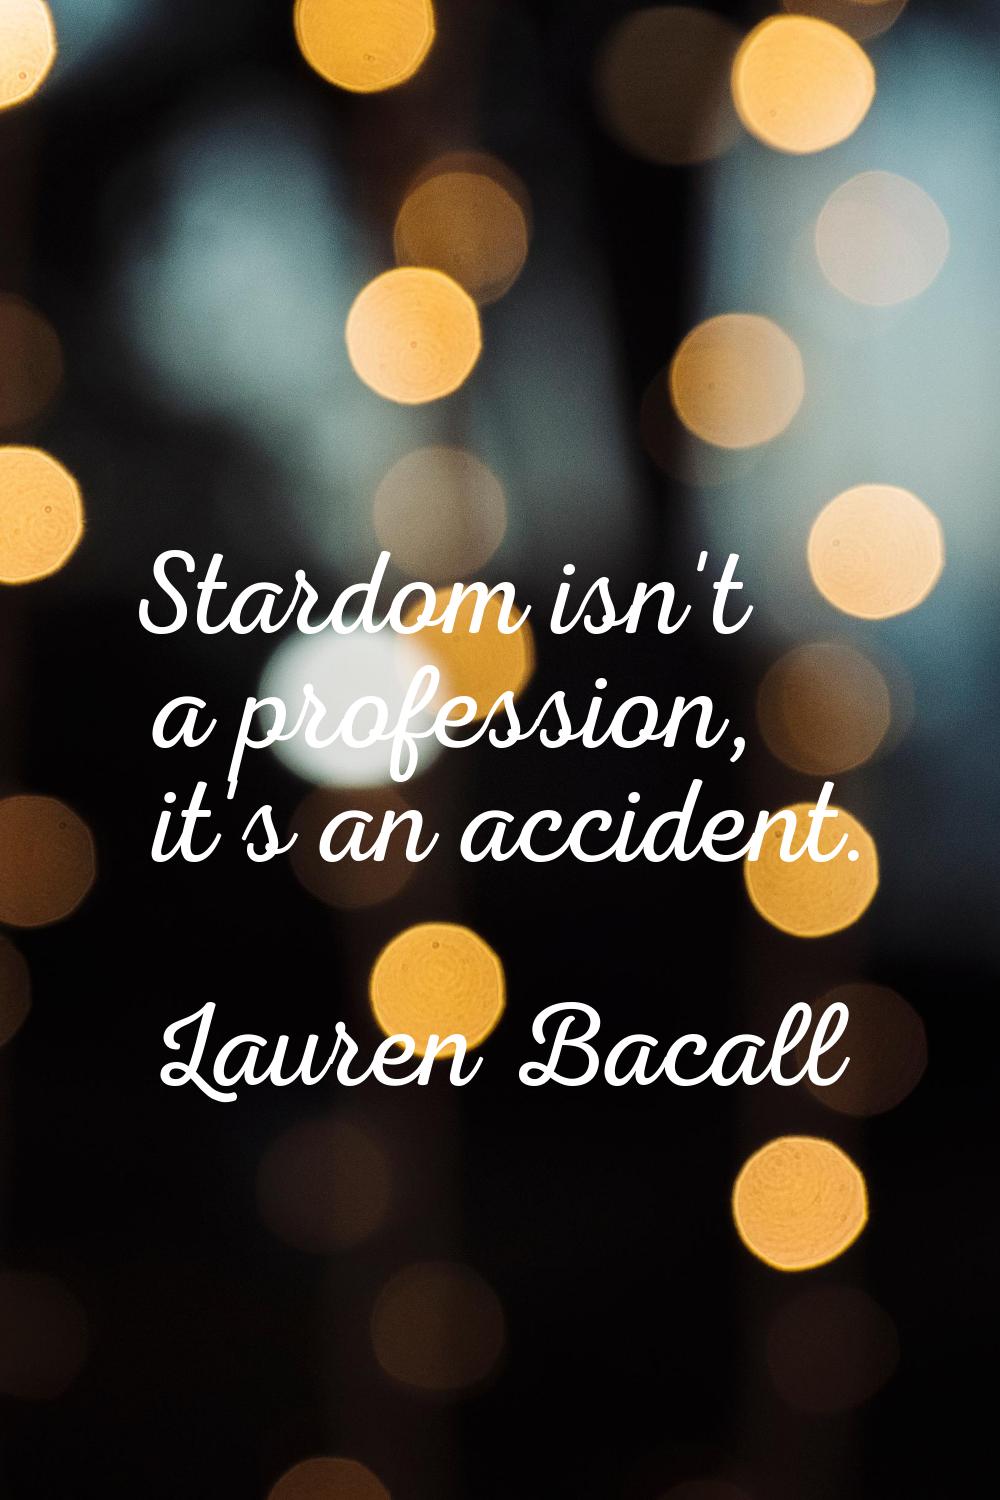 Stardom isn't a profession, it's an accident.